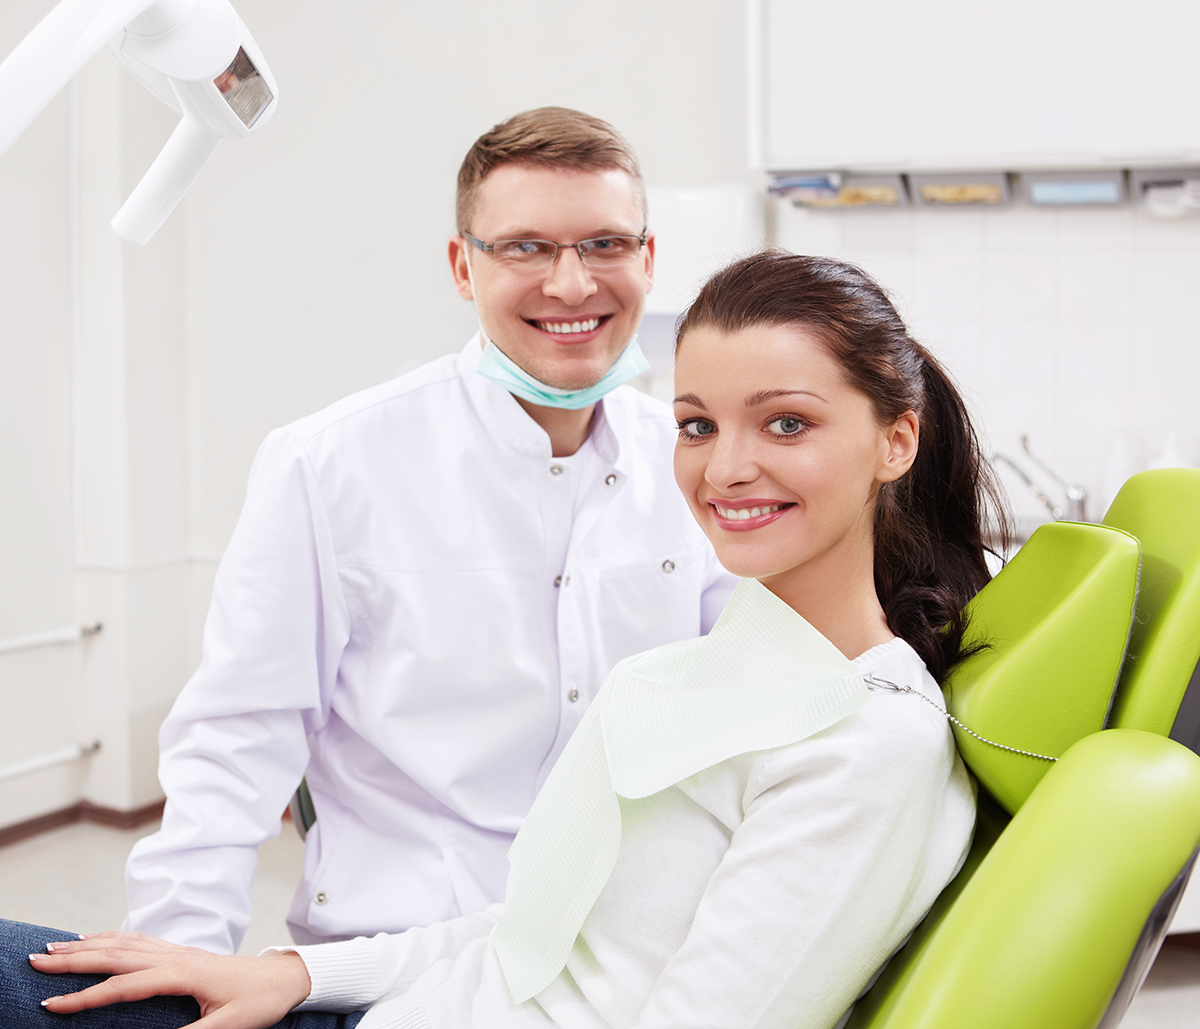 Strengthen Your Teeth and Prevent Decay with Fluoride Treatment